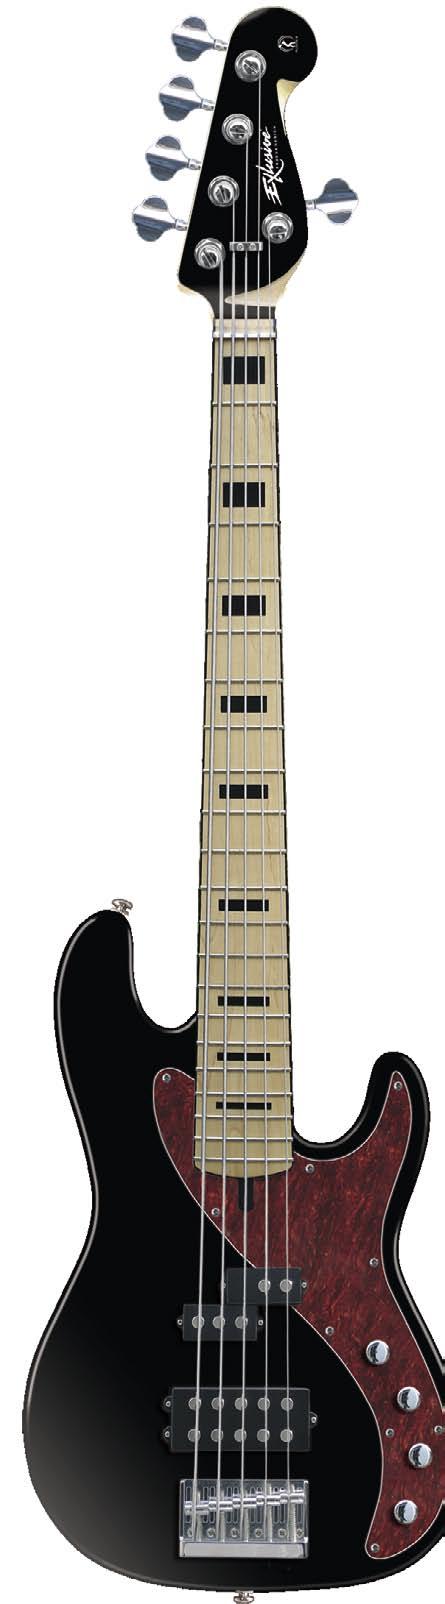 SPECIFICATIONS 34 CONSTRUCTION: Bolt on Alder FRETBOARD: FRETS: 21 HARDWARE: Chrome TUNERS: Light weight